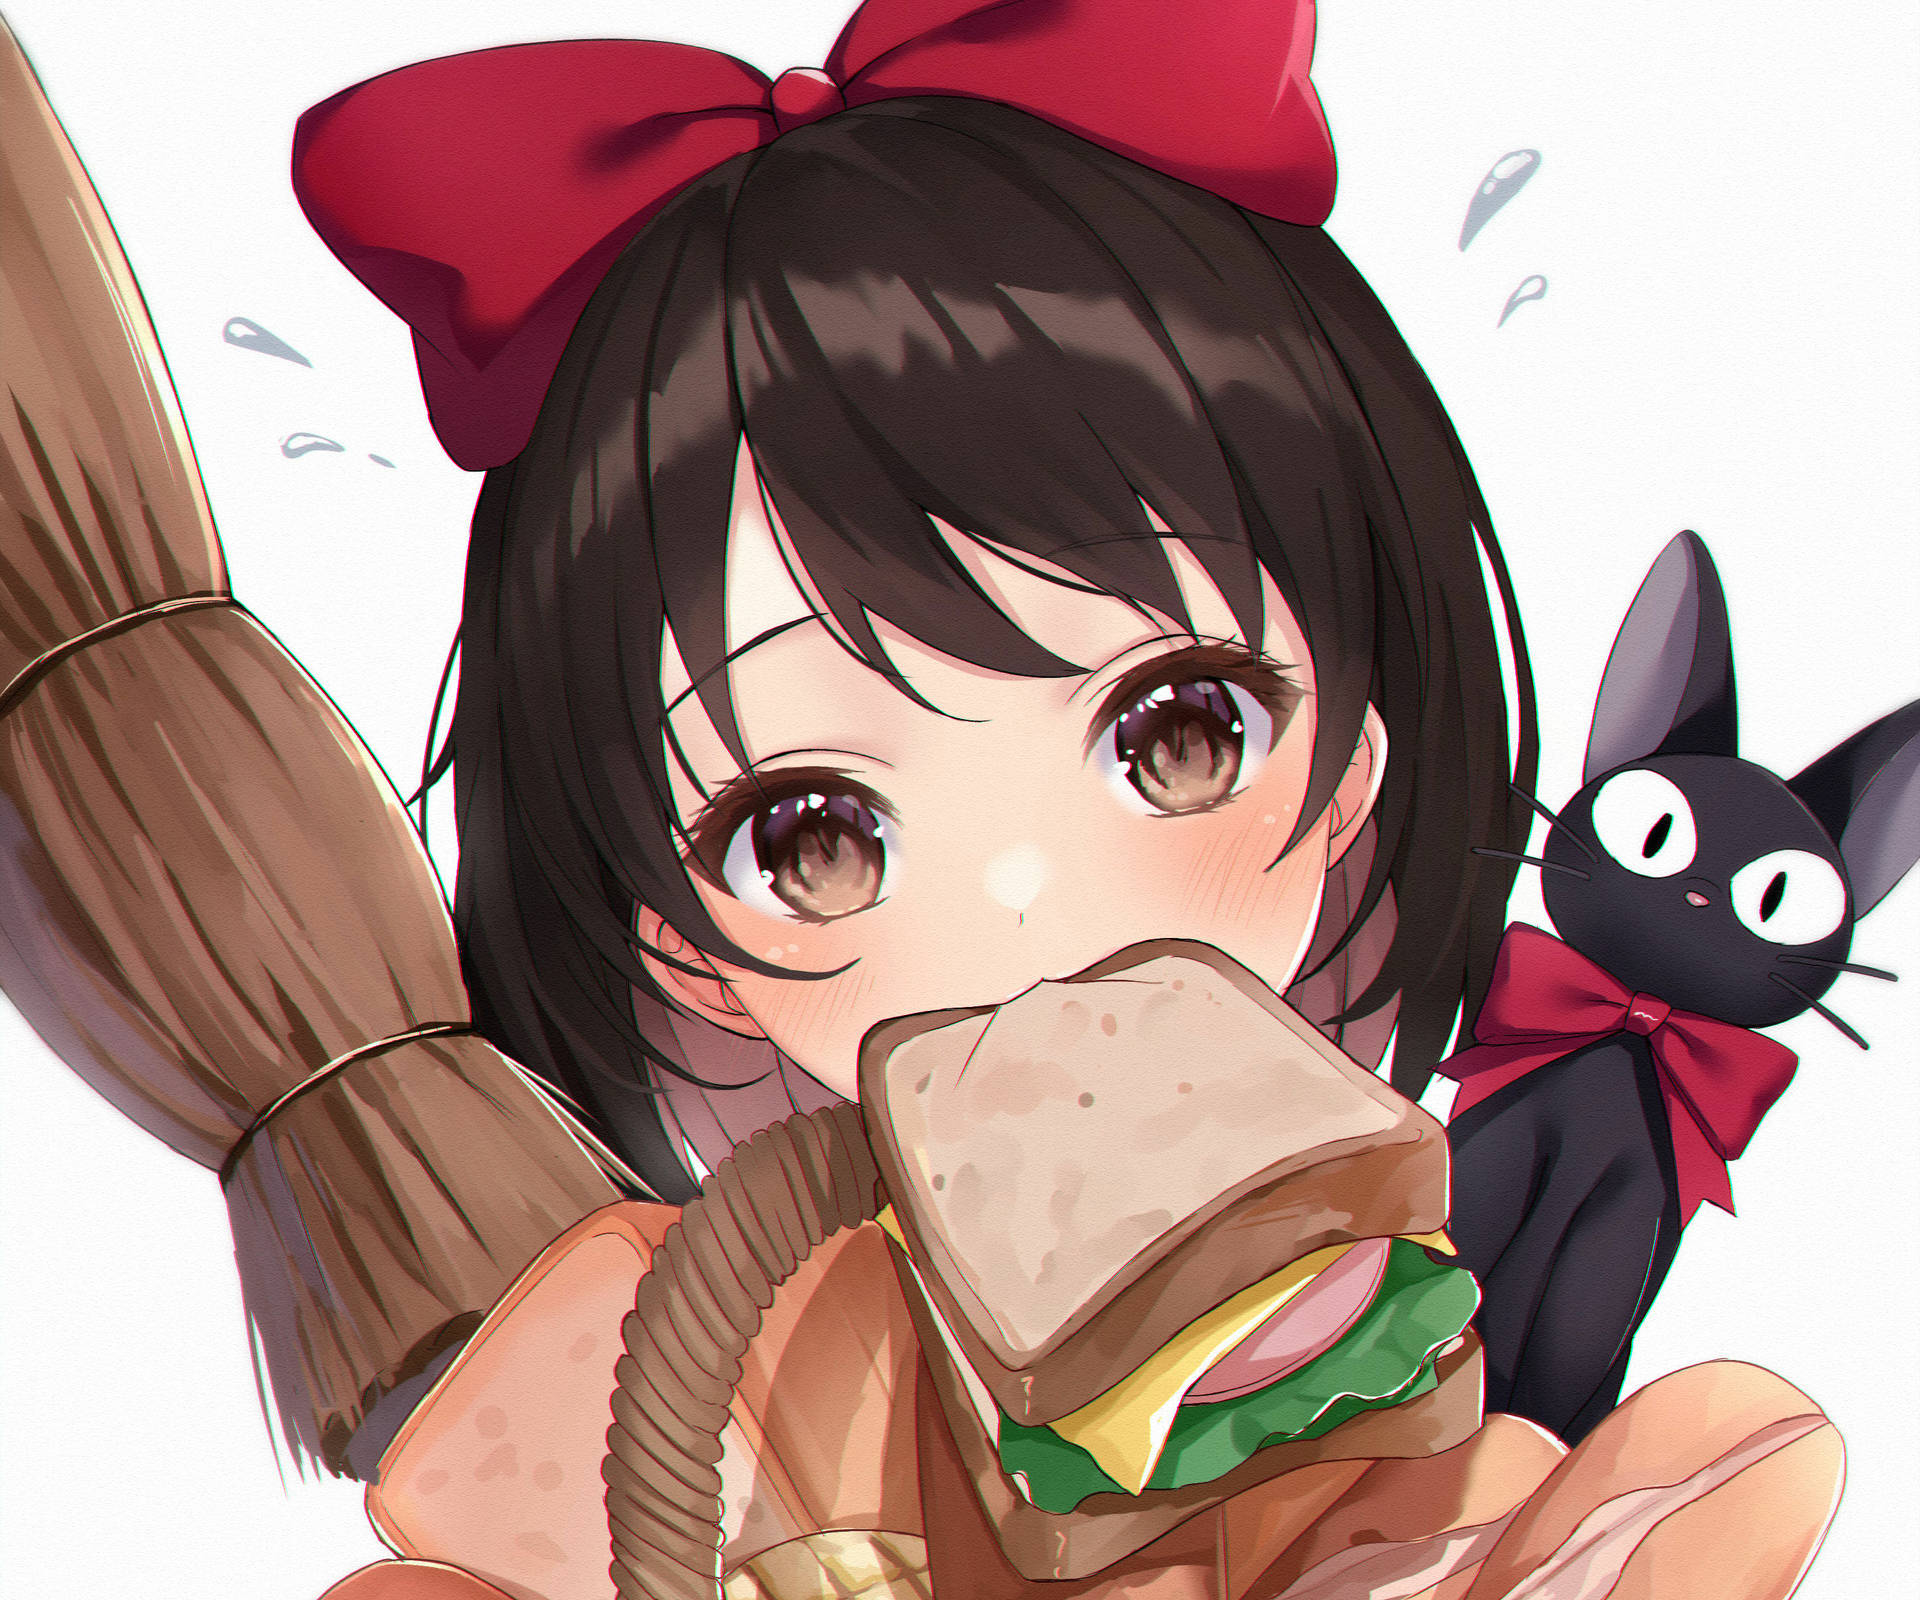 Food Service From Kikis Delivery Service Wallpaper